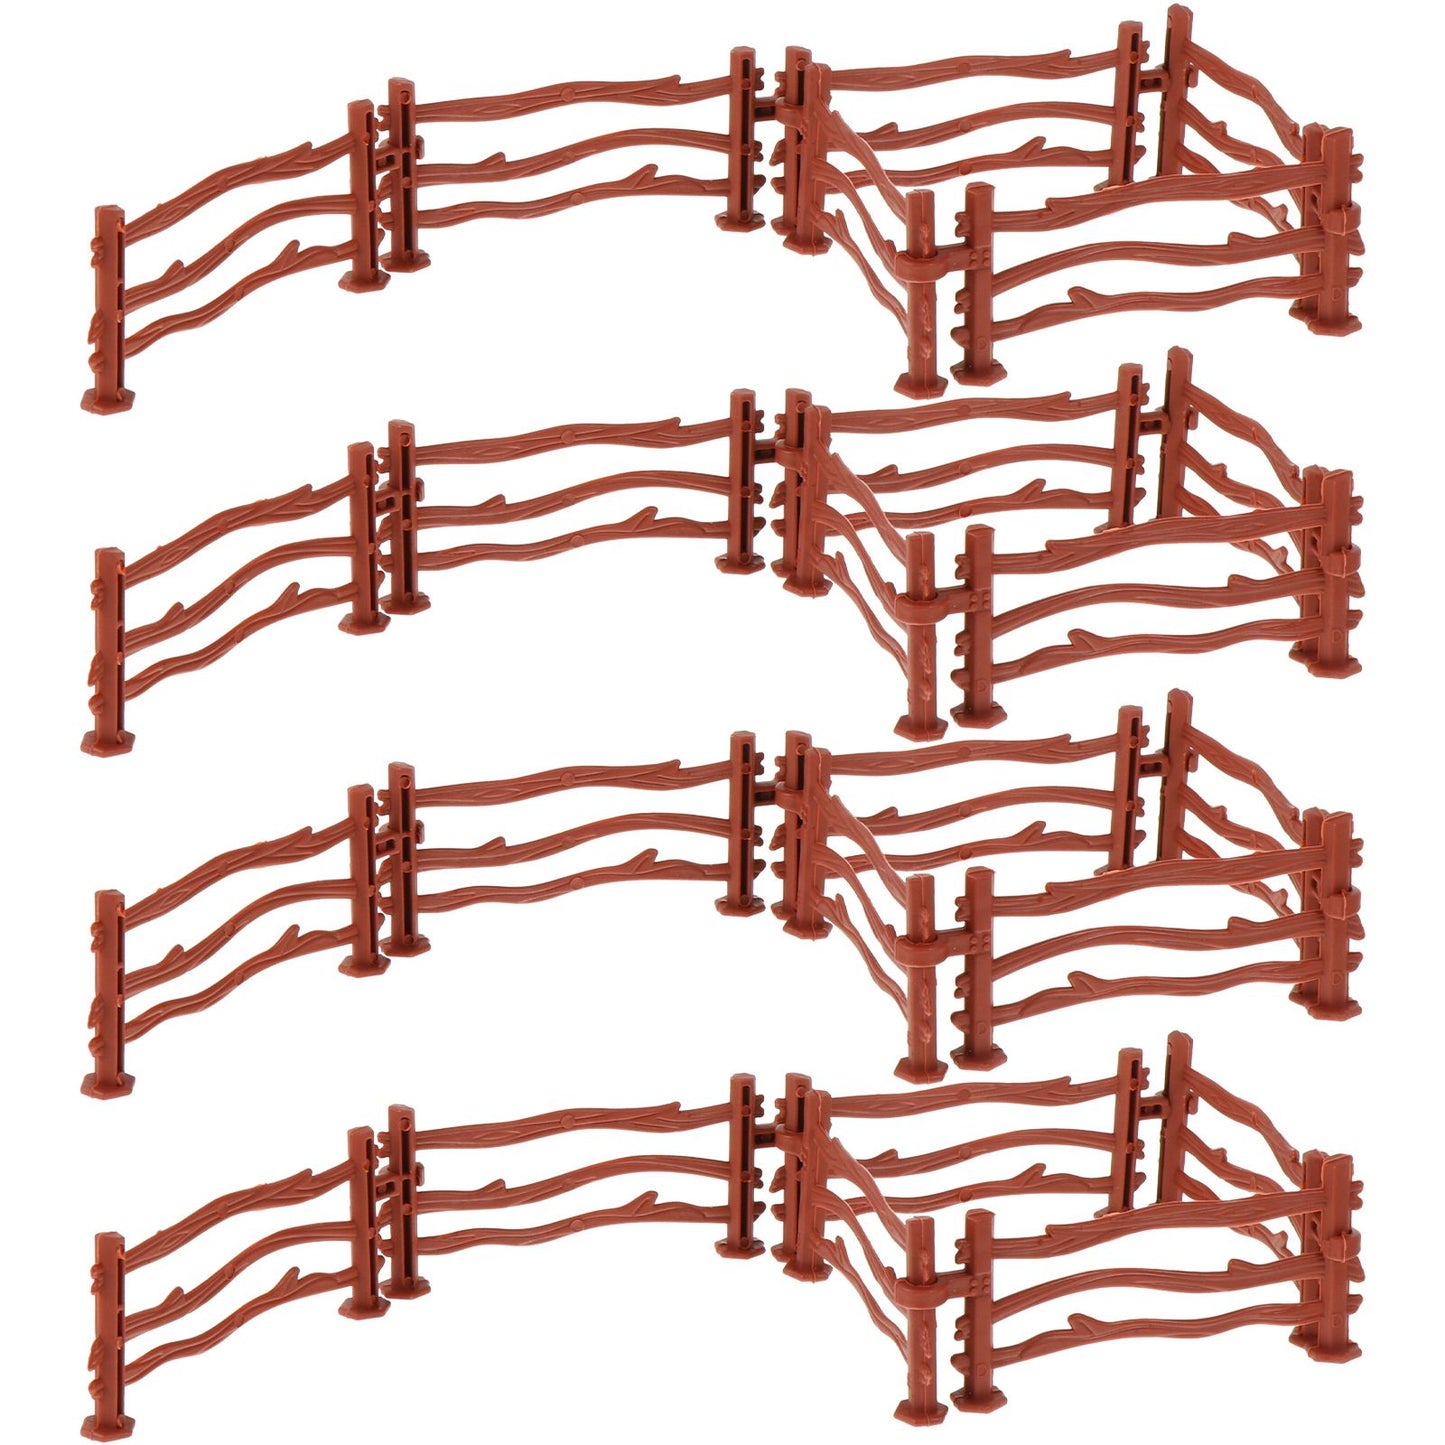 50pcs Simulation Fence Toys Plastic DIY Farm Ranch Zoo Sand Table Fence Models Decoration Educational Toy Childrens Toy Gift